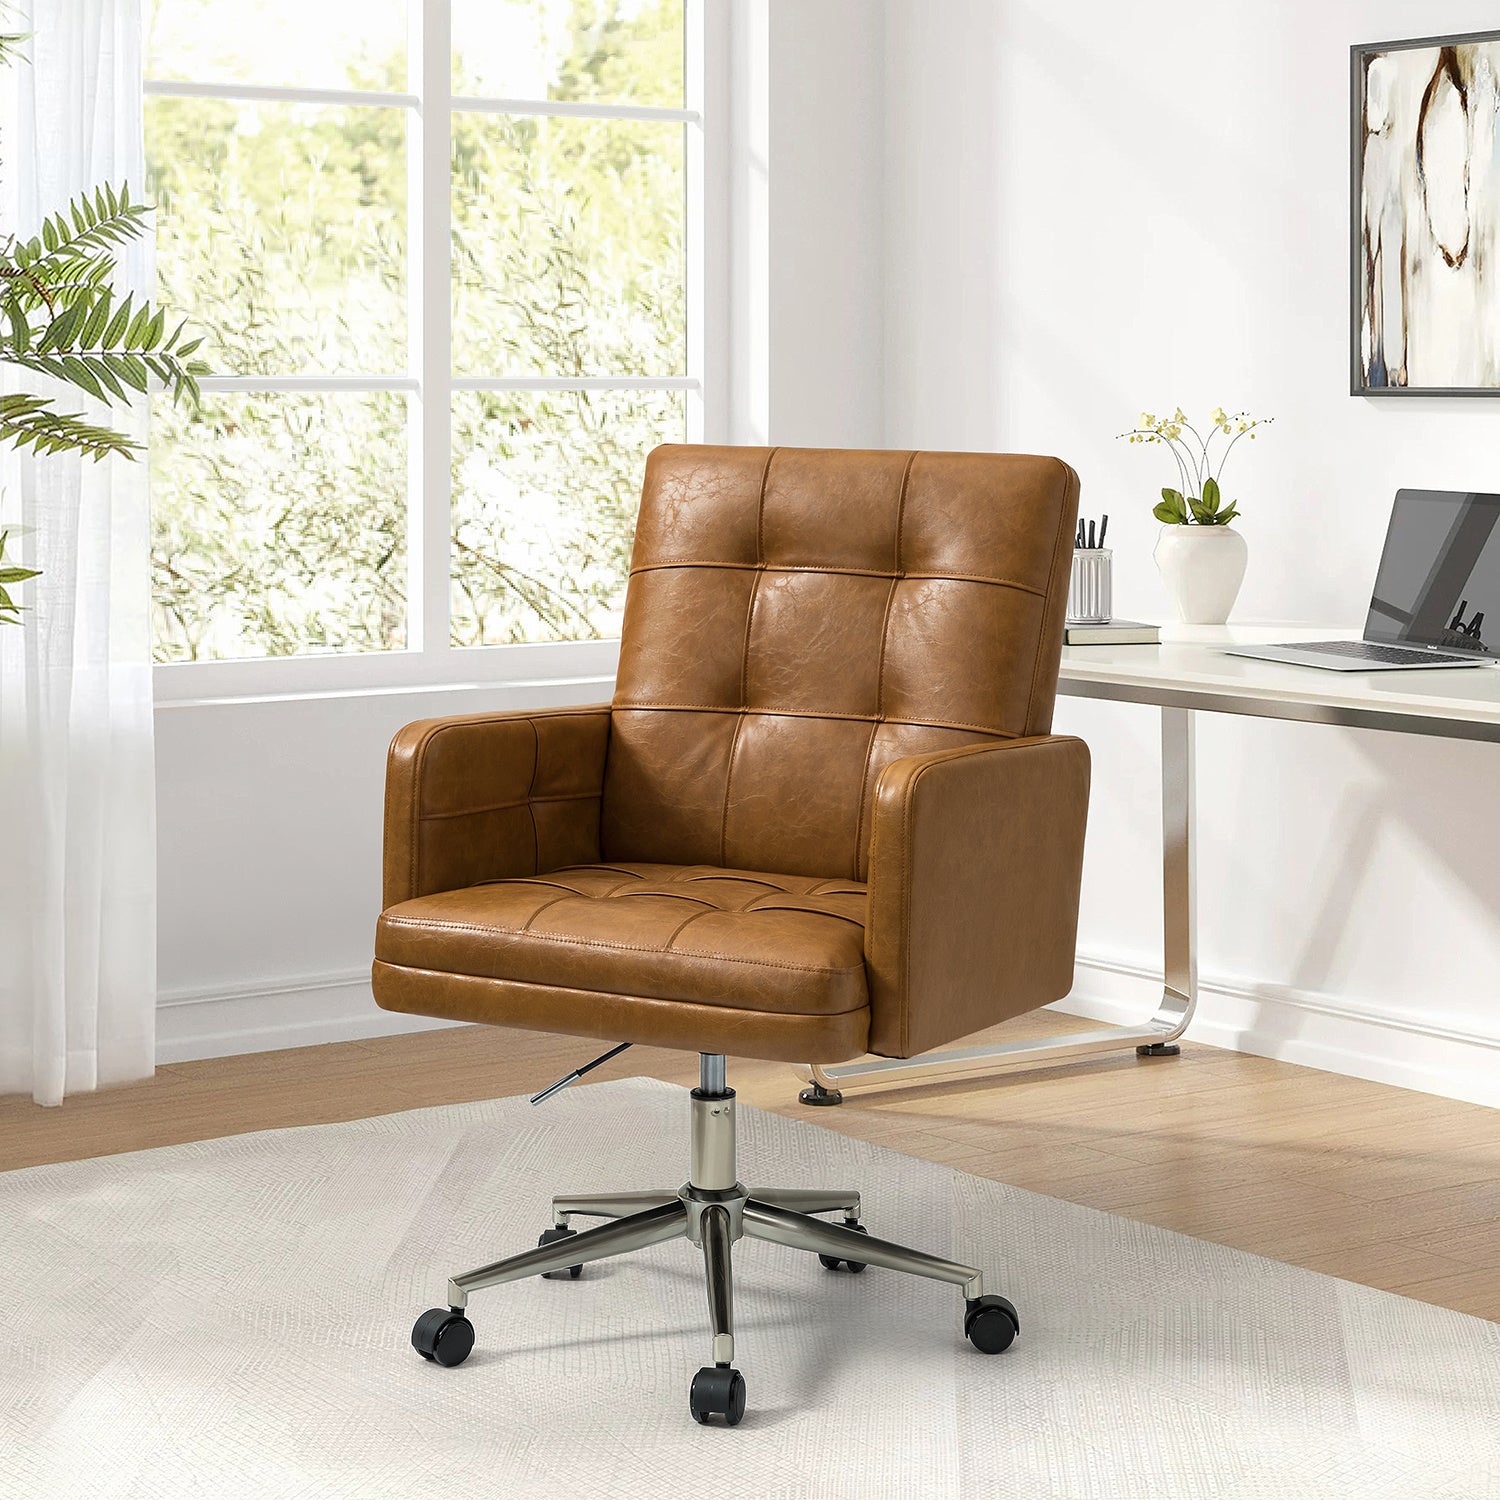 Brown Leather Chair Desk